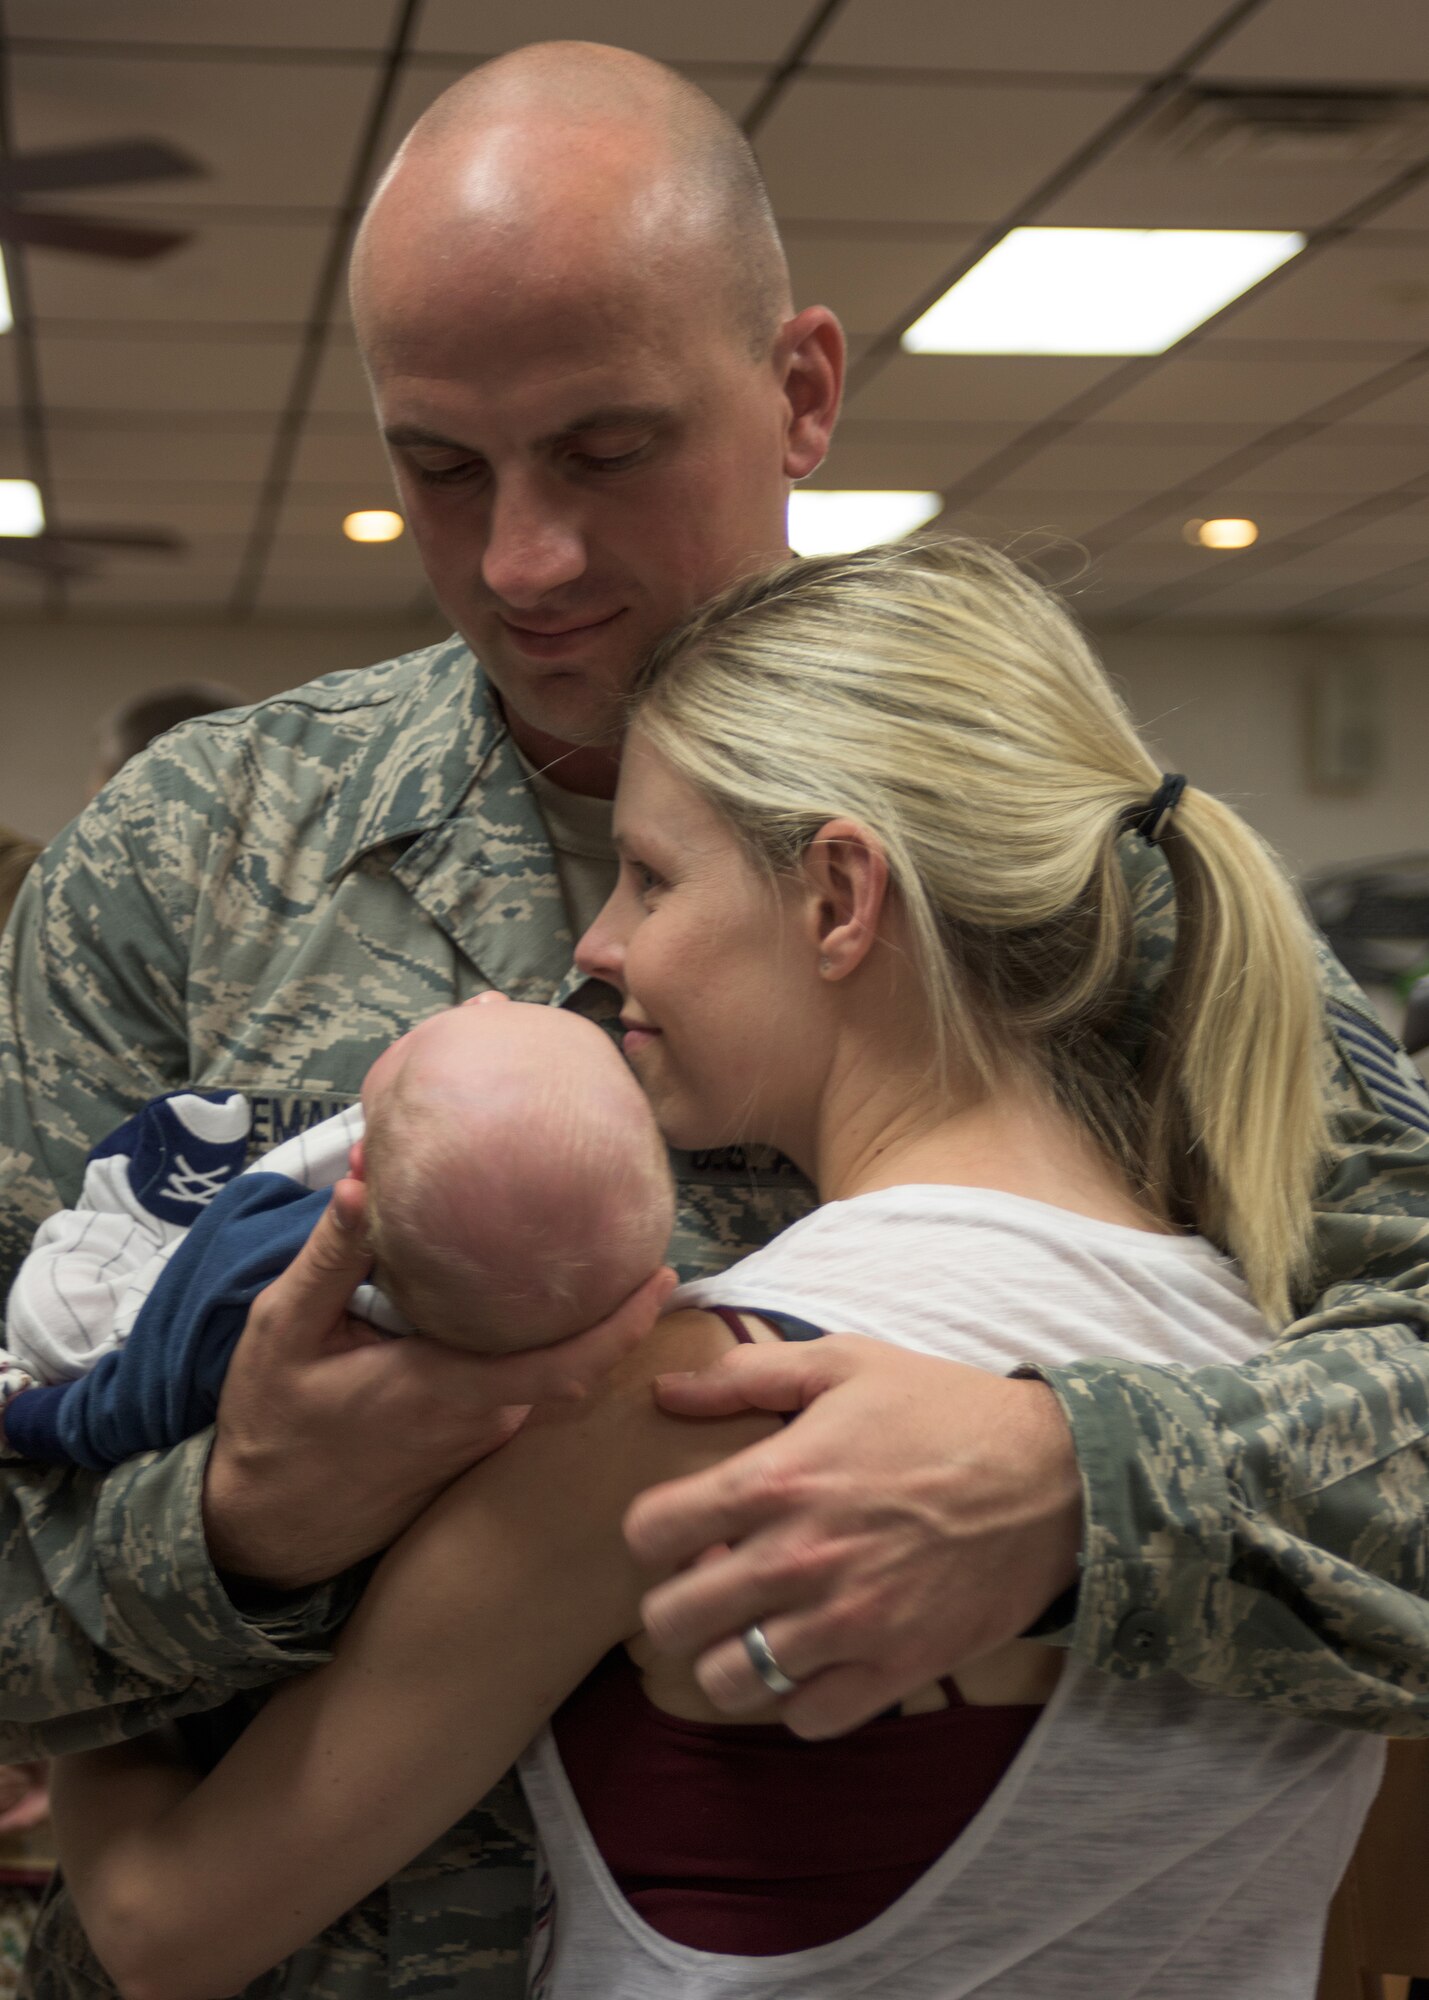 Tech. Sgt. Josh Tremain assigned to the 137th Special Operations Communication Flight, holds his 4-week old baby boy prior to deploying from Will Rogers Air National Guard Base, October 19, 2016. Tremain is one of over 140 Airmen who will deploy from WRANGB in support of Operations Freedom's Sentinel in Southwest Asia, the first major deployment for the 137 SOW as a special operations wing. (U.S. Air National Guard photo by Tech. Sgt. Caroline Essex)